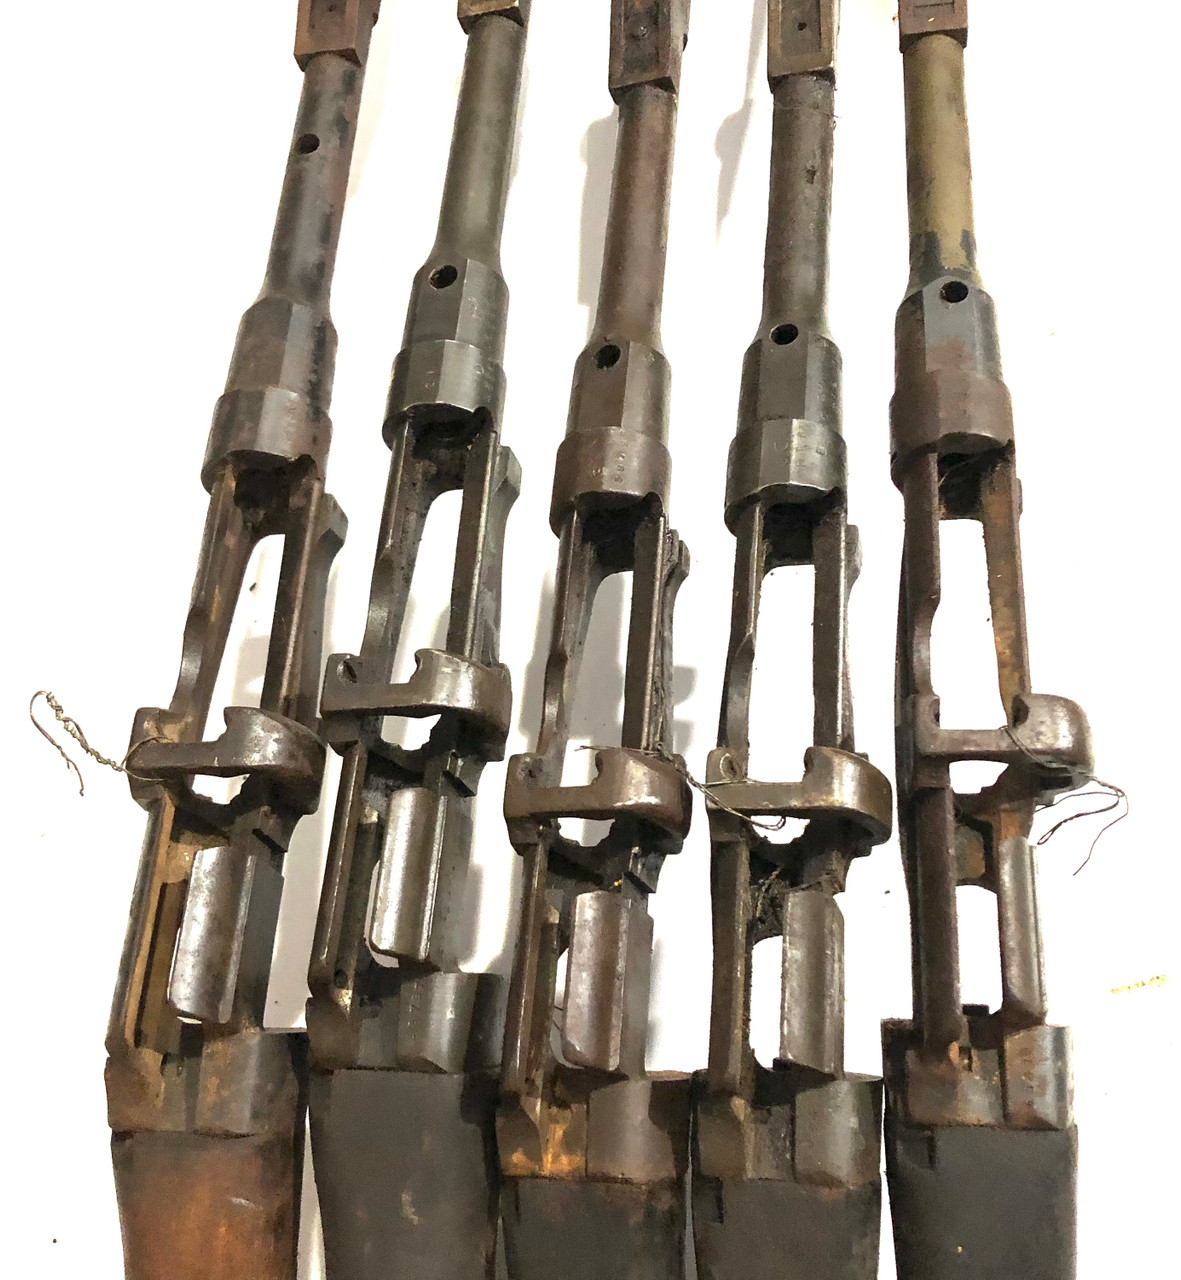 Lot 9: 5 x Lithgow No1 MKIII DP Barreled Receivers with Cut Barrels (FFL Required)